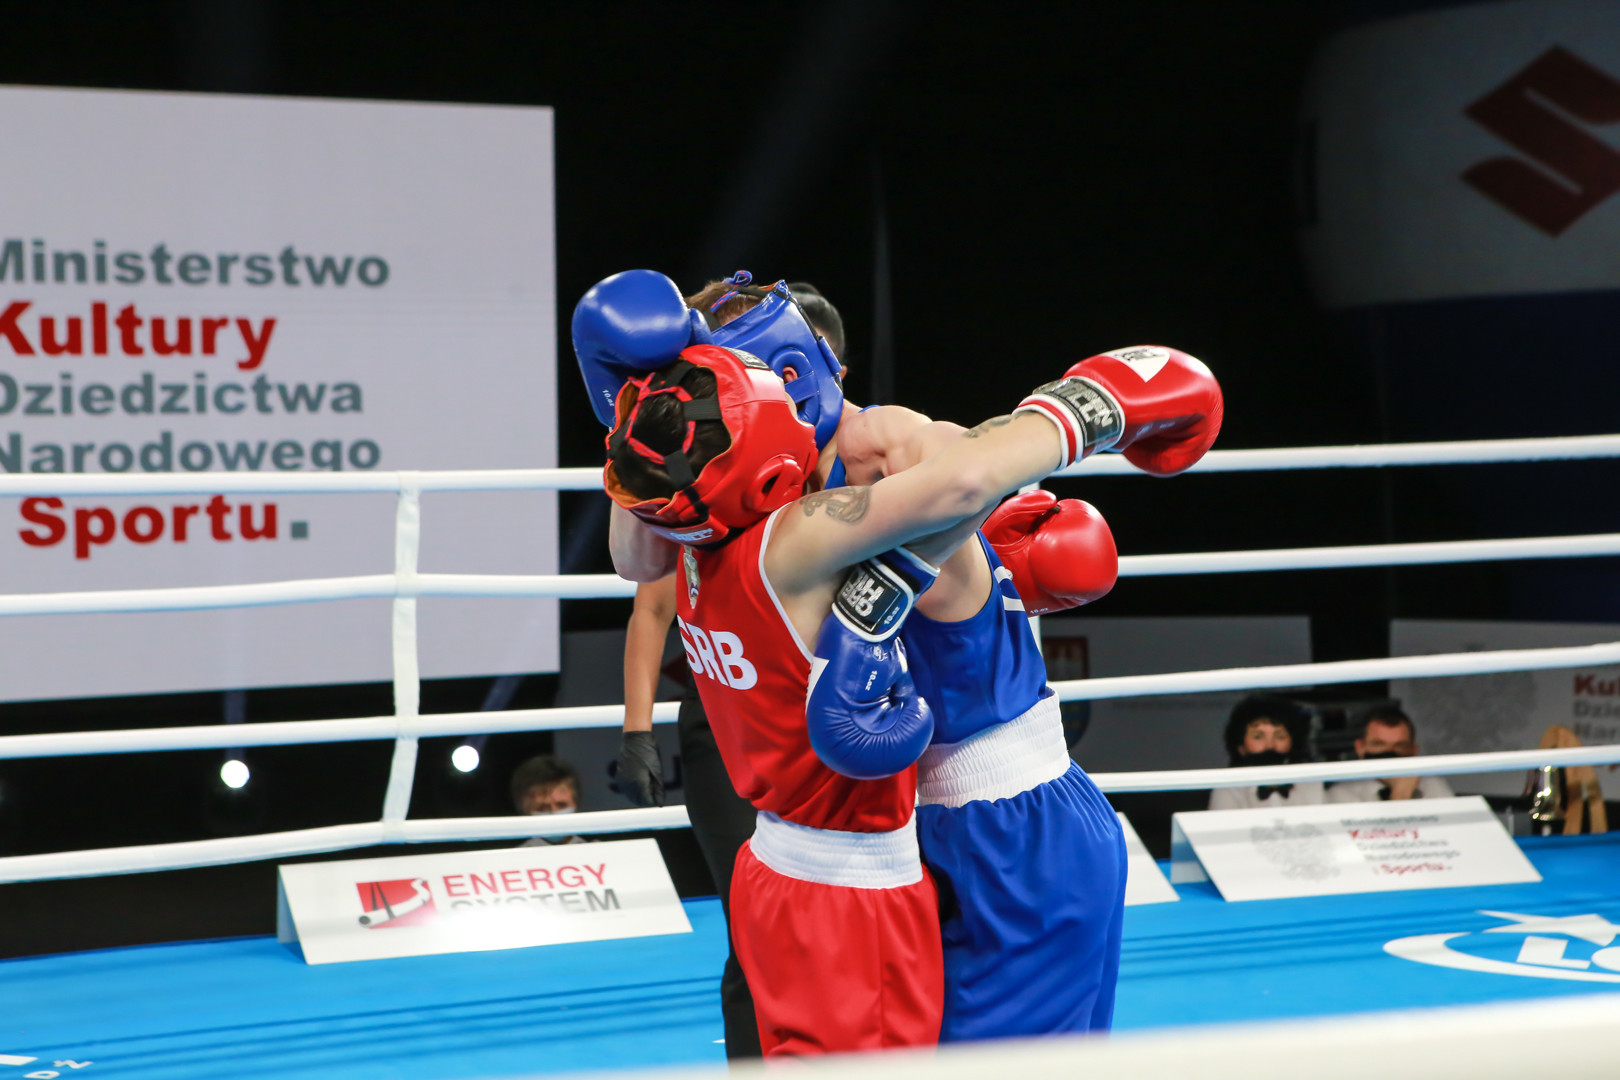 More than 400 male and female boxers from 52 countries are competing in the Championships in Poland ©AIBA